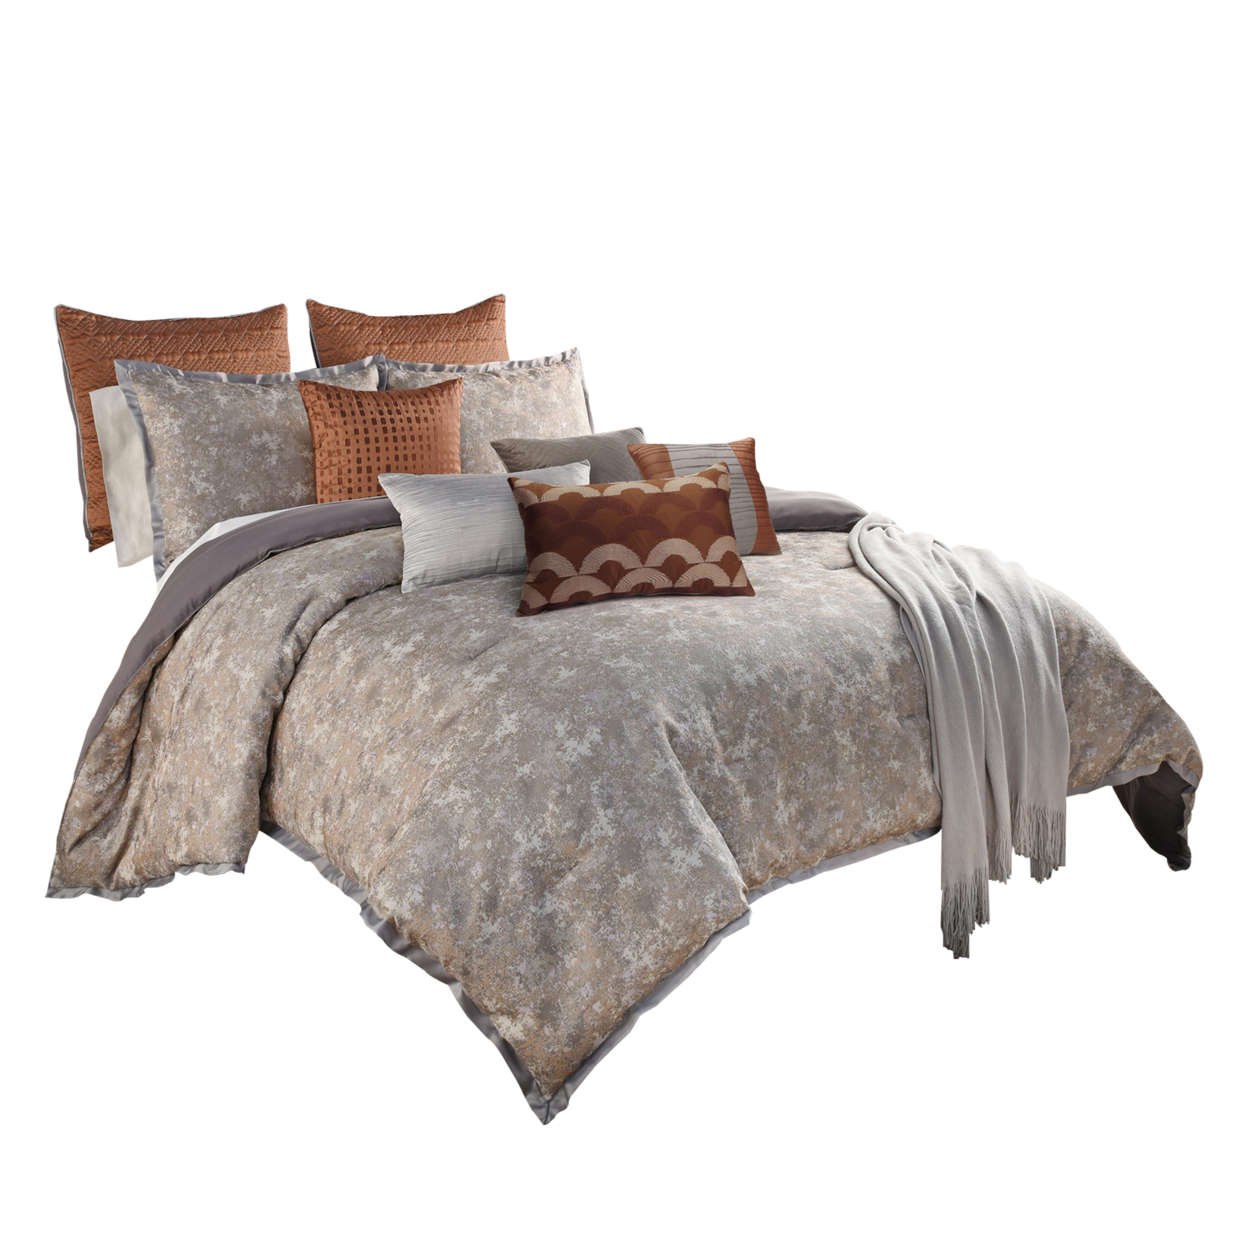 12 Piece Queen Polyester Comforter Set With Textured Details,Gray And Brown- Saltoro Sherpi